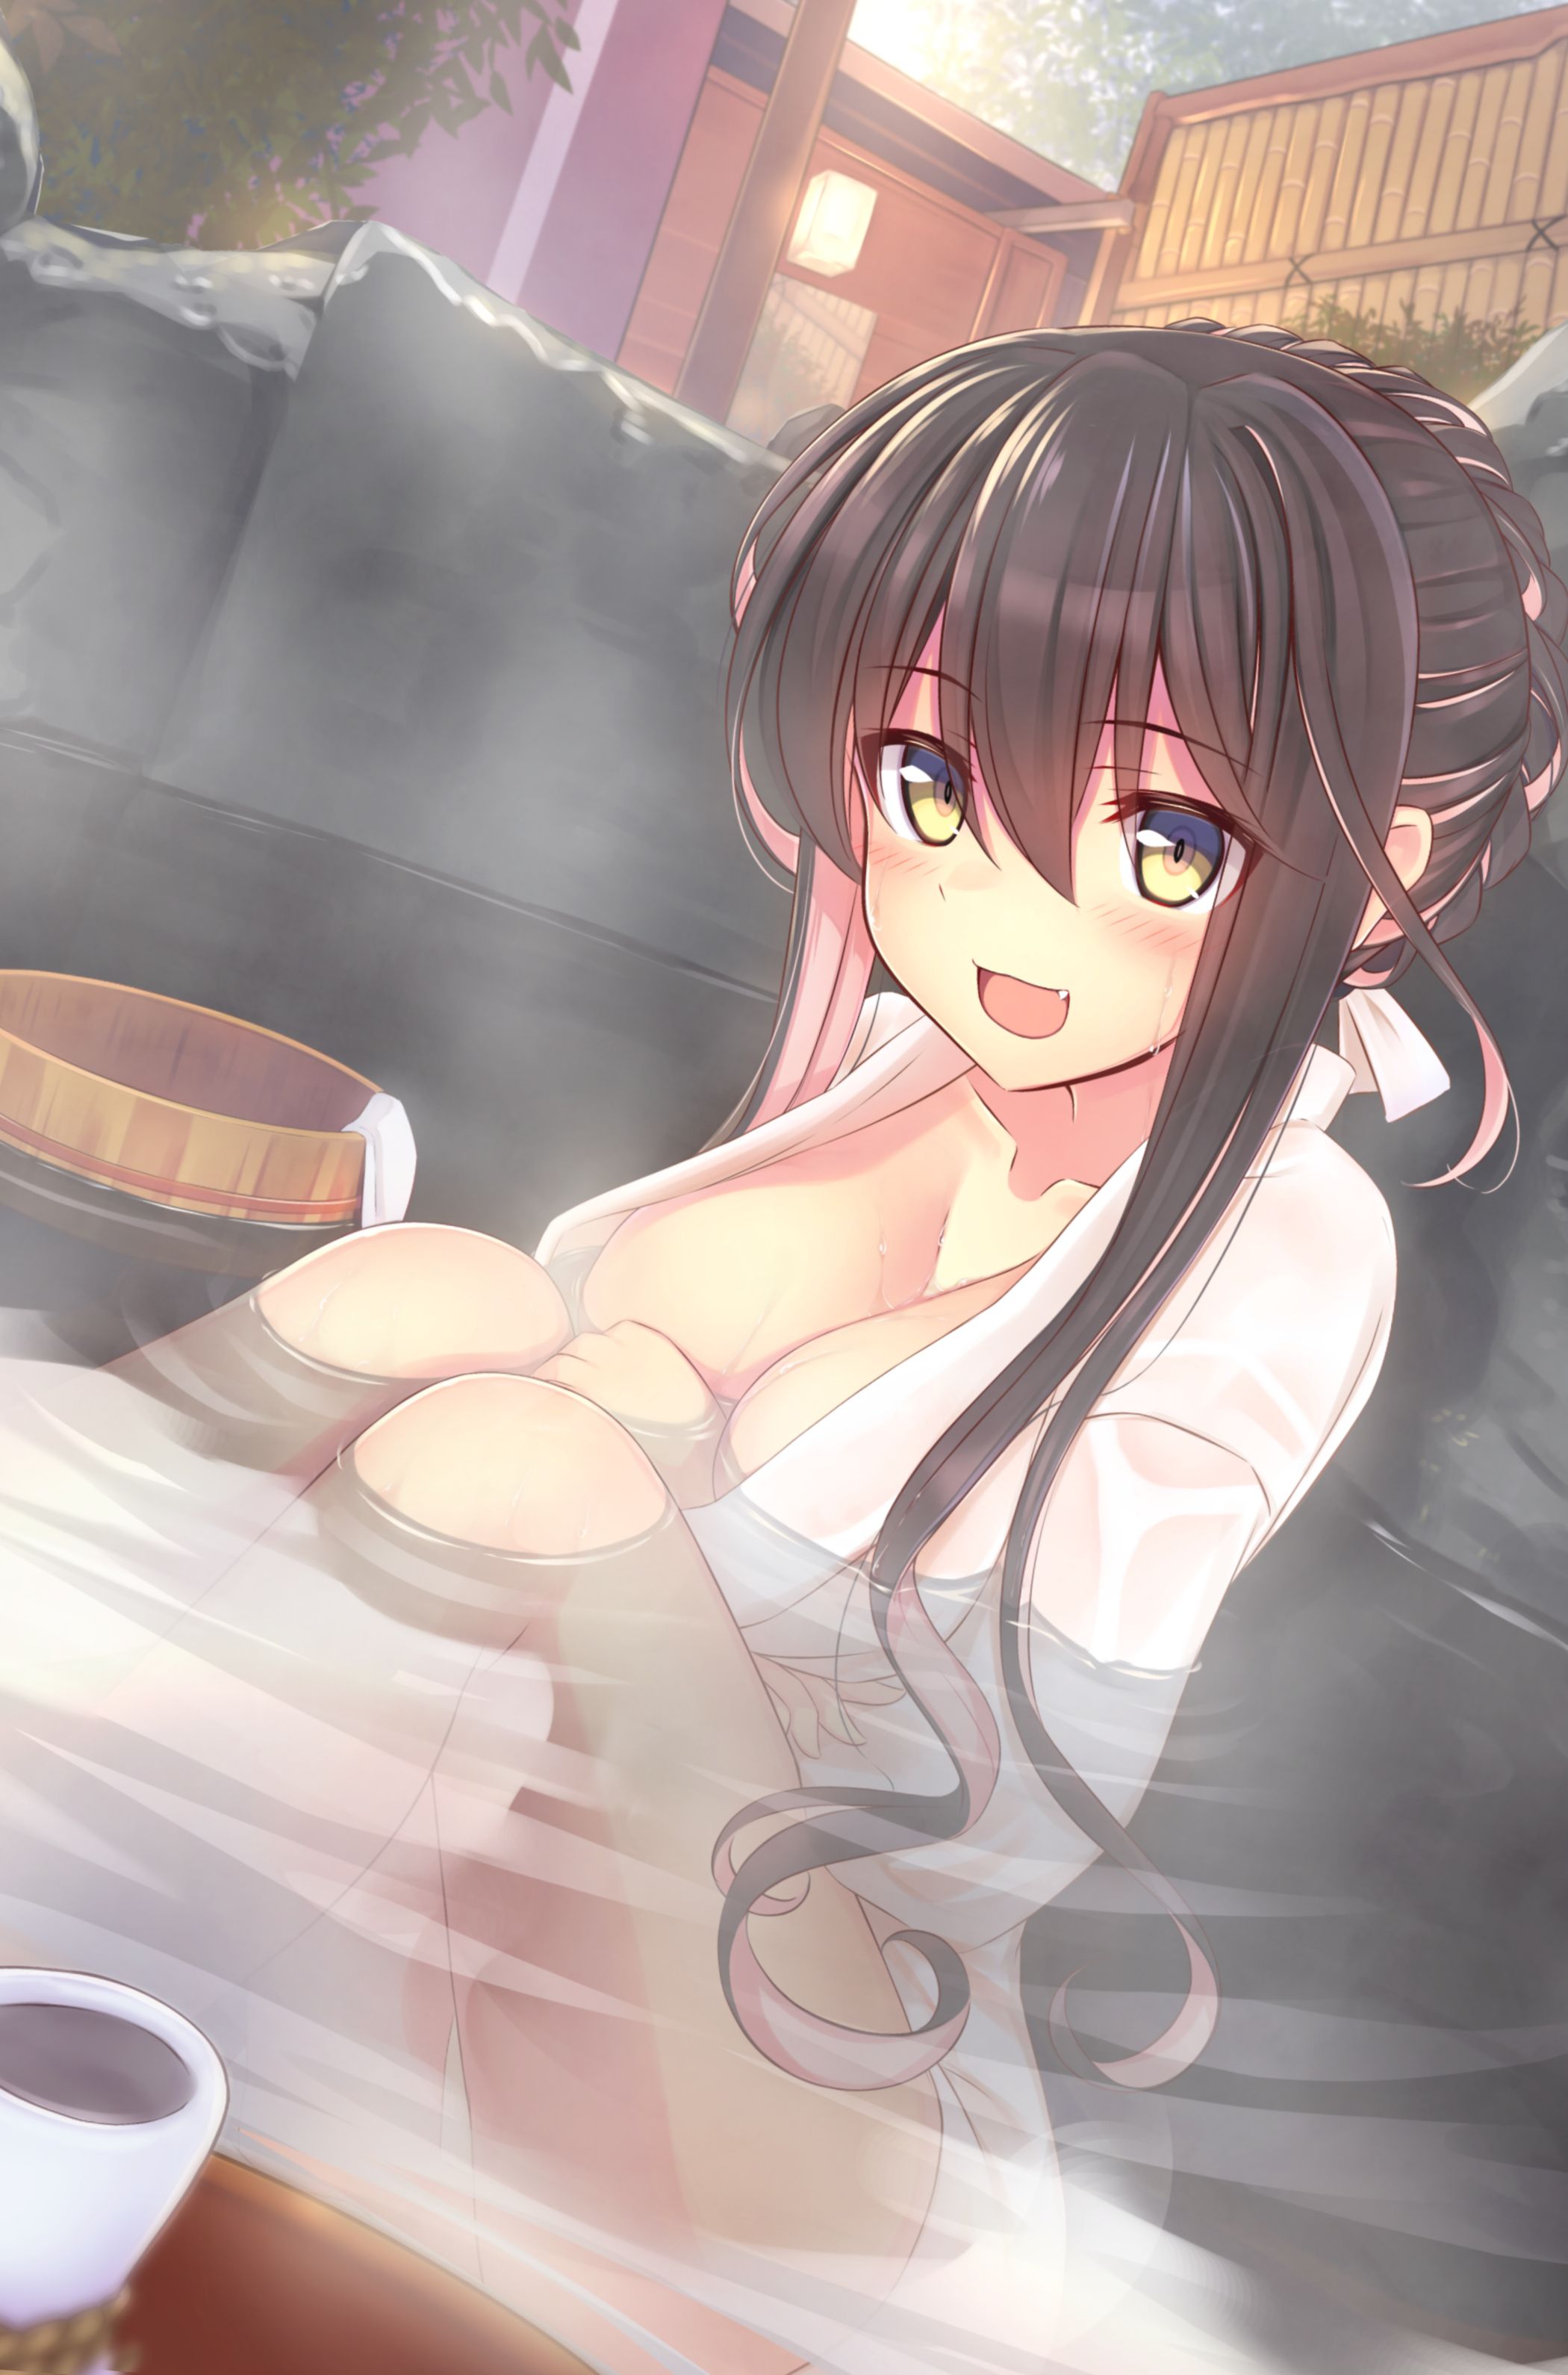 Erotic anime summary erotic image collection of beautiful girls and beautiful girls taking a bath [50 sheets] 43